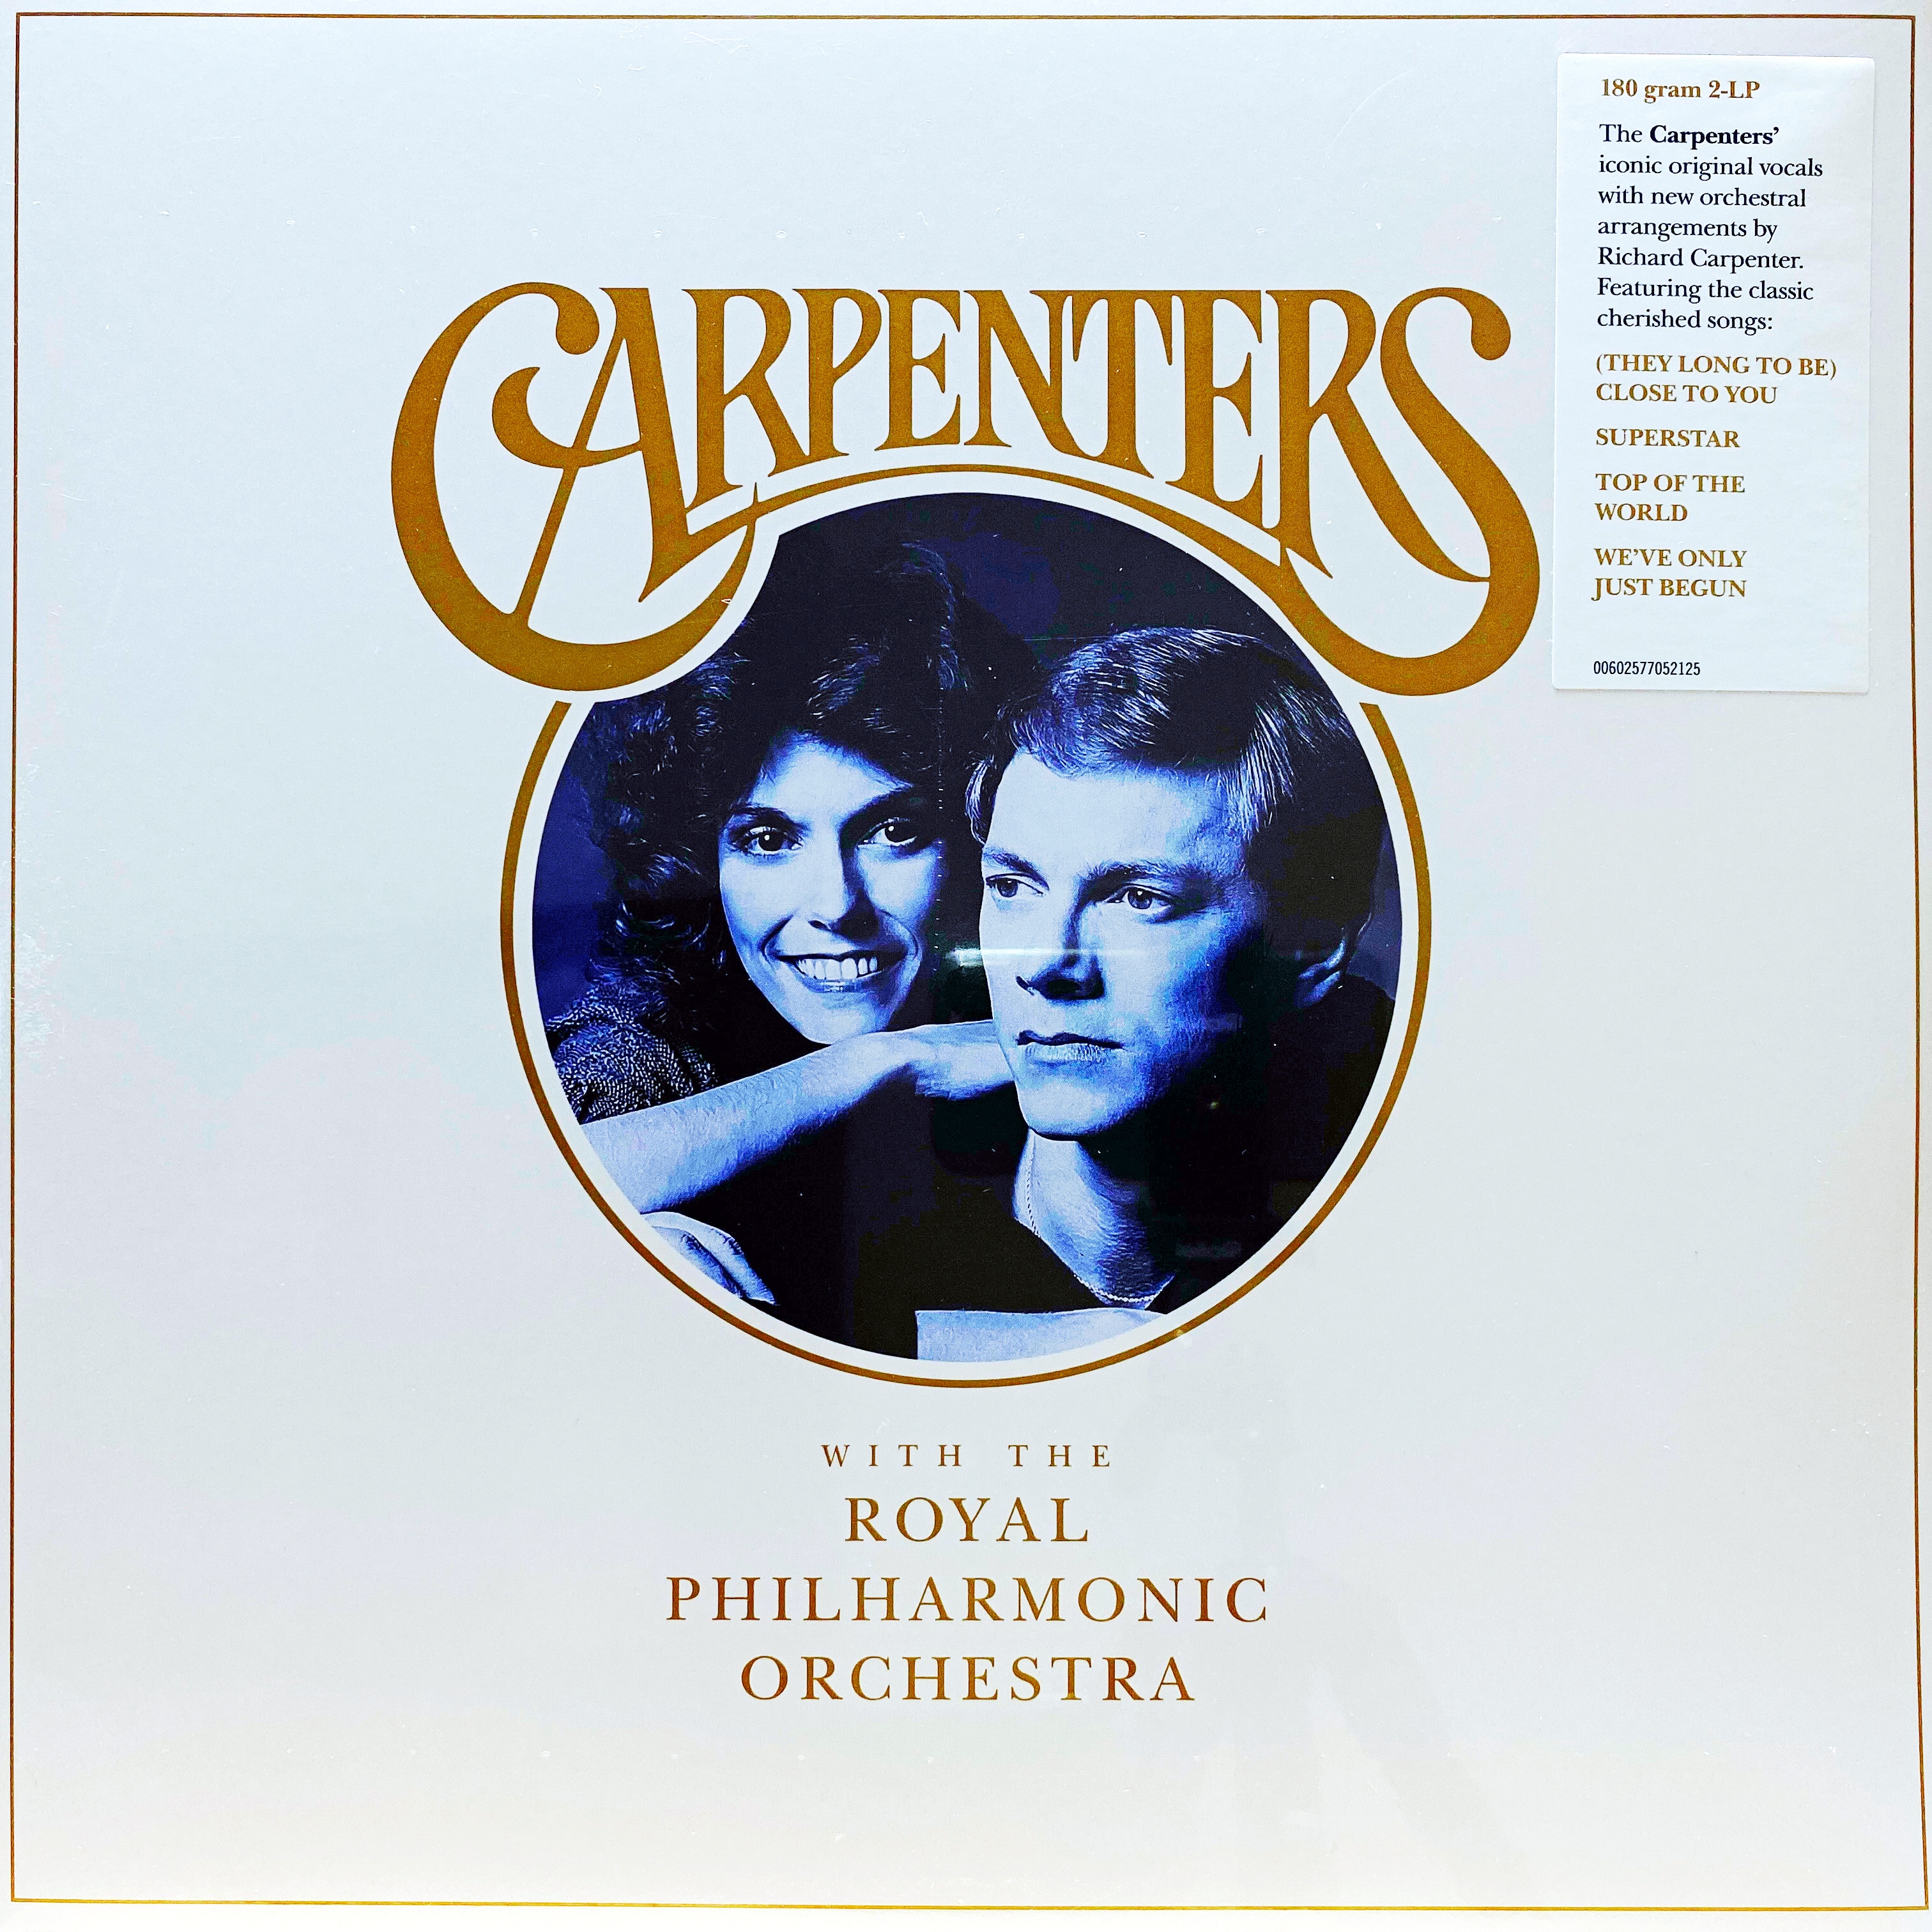 2xLP Carpenters With The Royal Philharmonic Orchestra